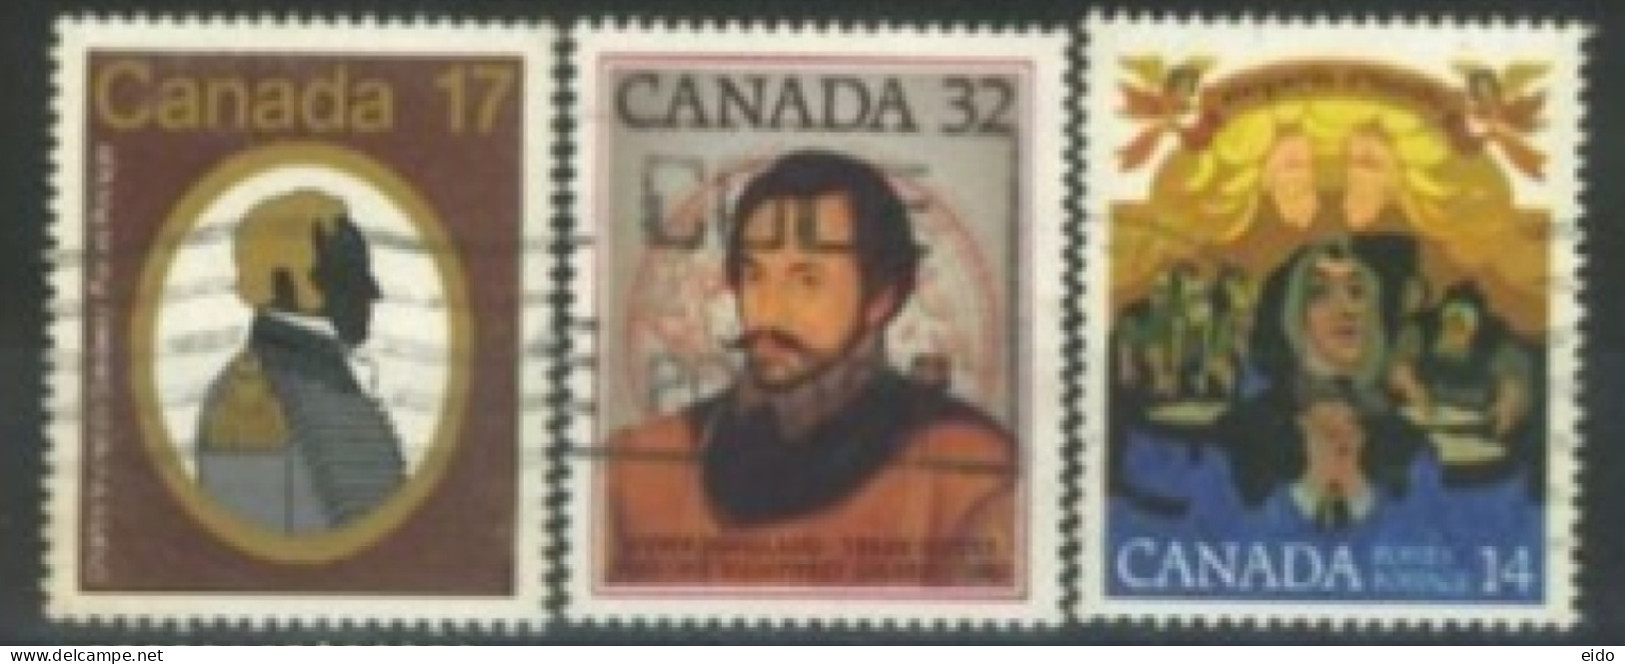 CANADA - 1978/83, MARGUERITE D'YOUVILLE COMMEMORATION, CHARLES MICHEL & SIR HUMPHREY. STAMPS SET OF 3, USED. - Gebruikt